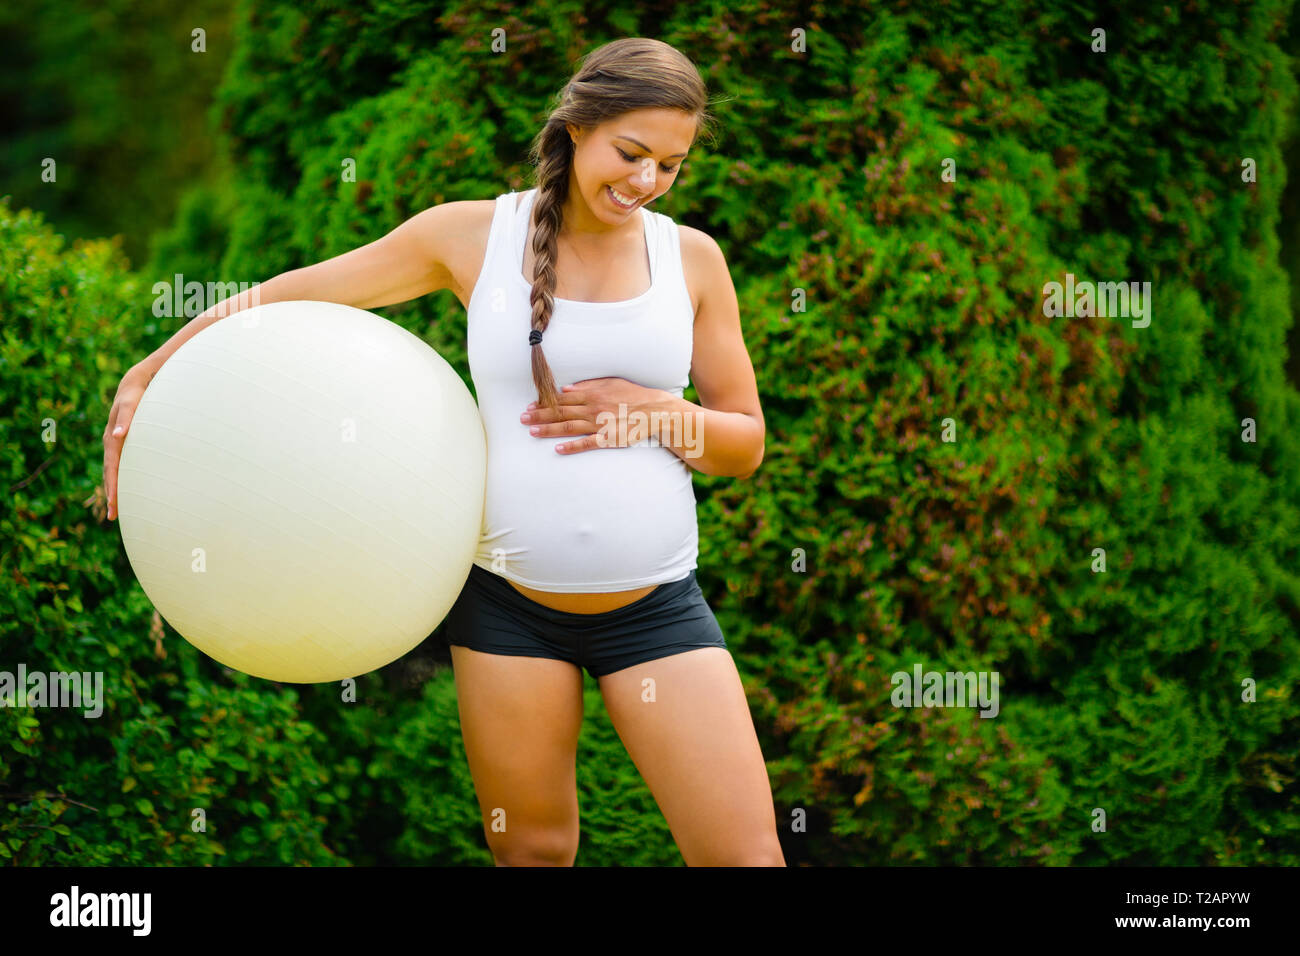 Smiling Pregnant Female Touching Belly While Holding Fitness Ball Stock Photo